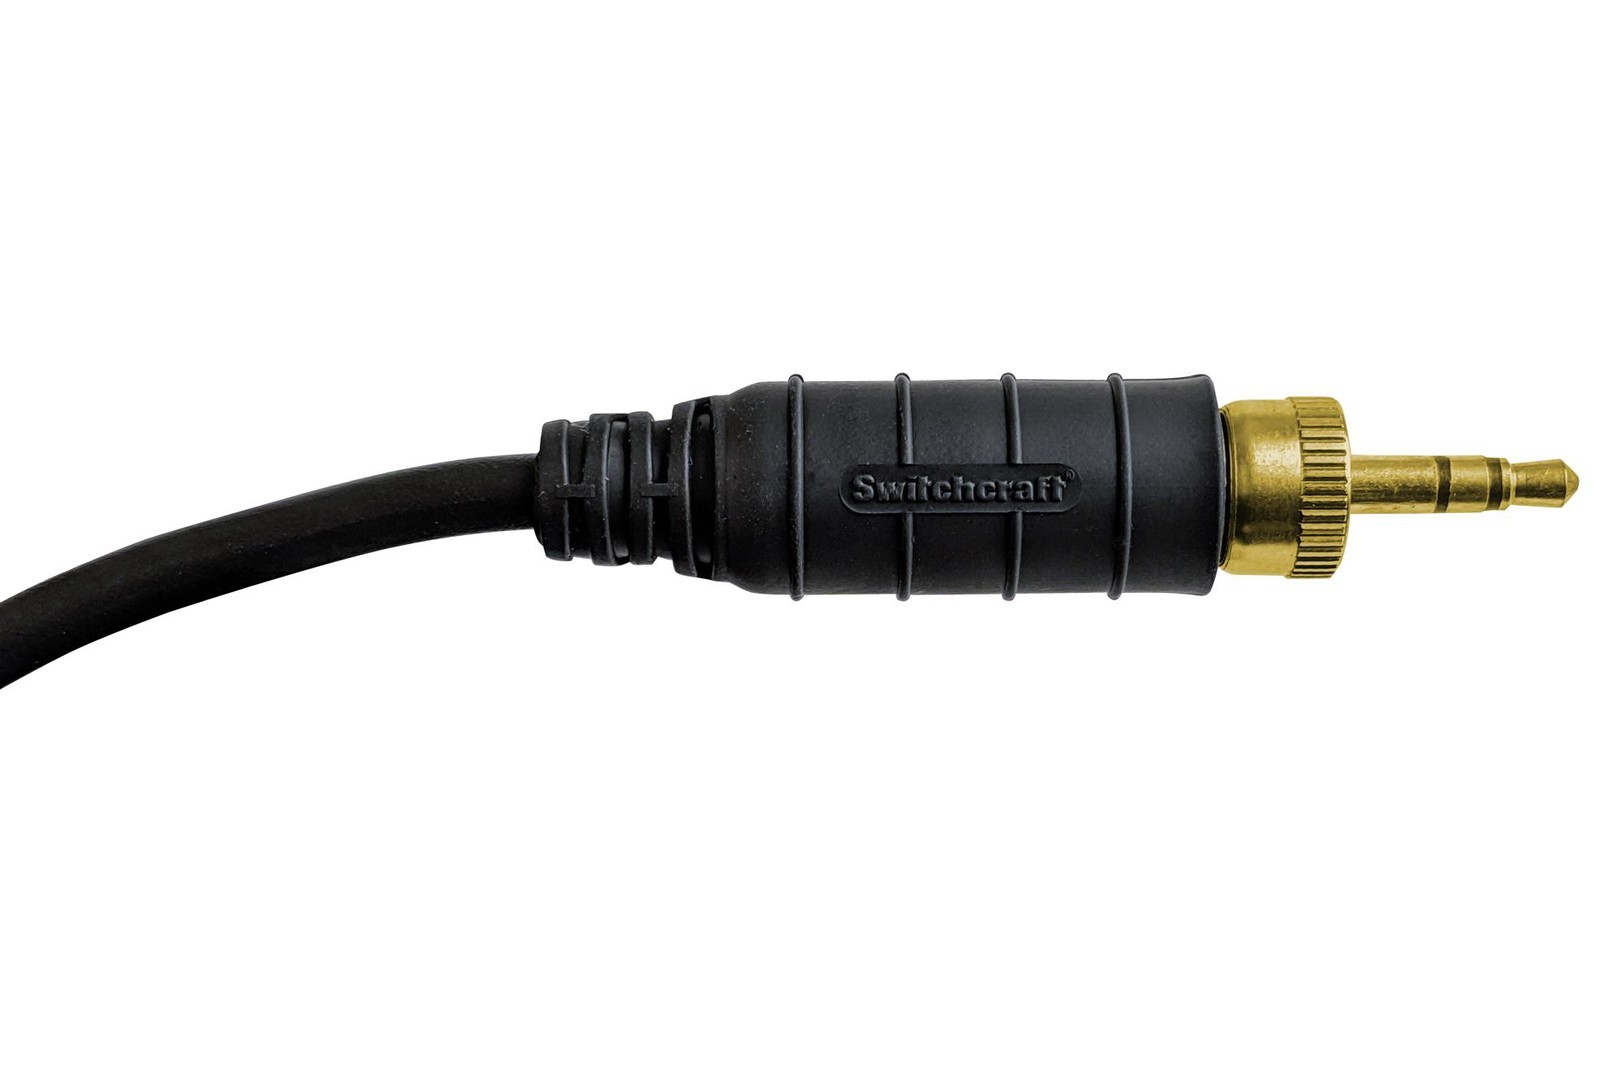 Switchcraft/conxall 35Hdlsau17 3.5mm Lck Sld Stereo Plug .17 Gold, Rohs